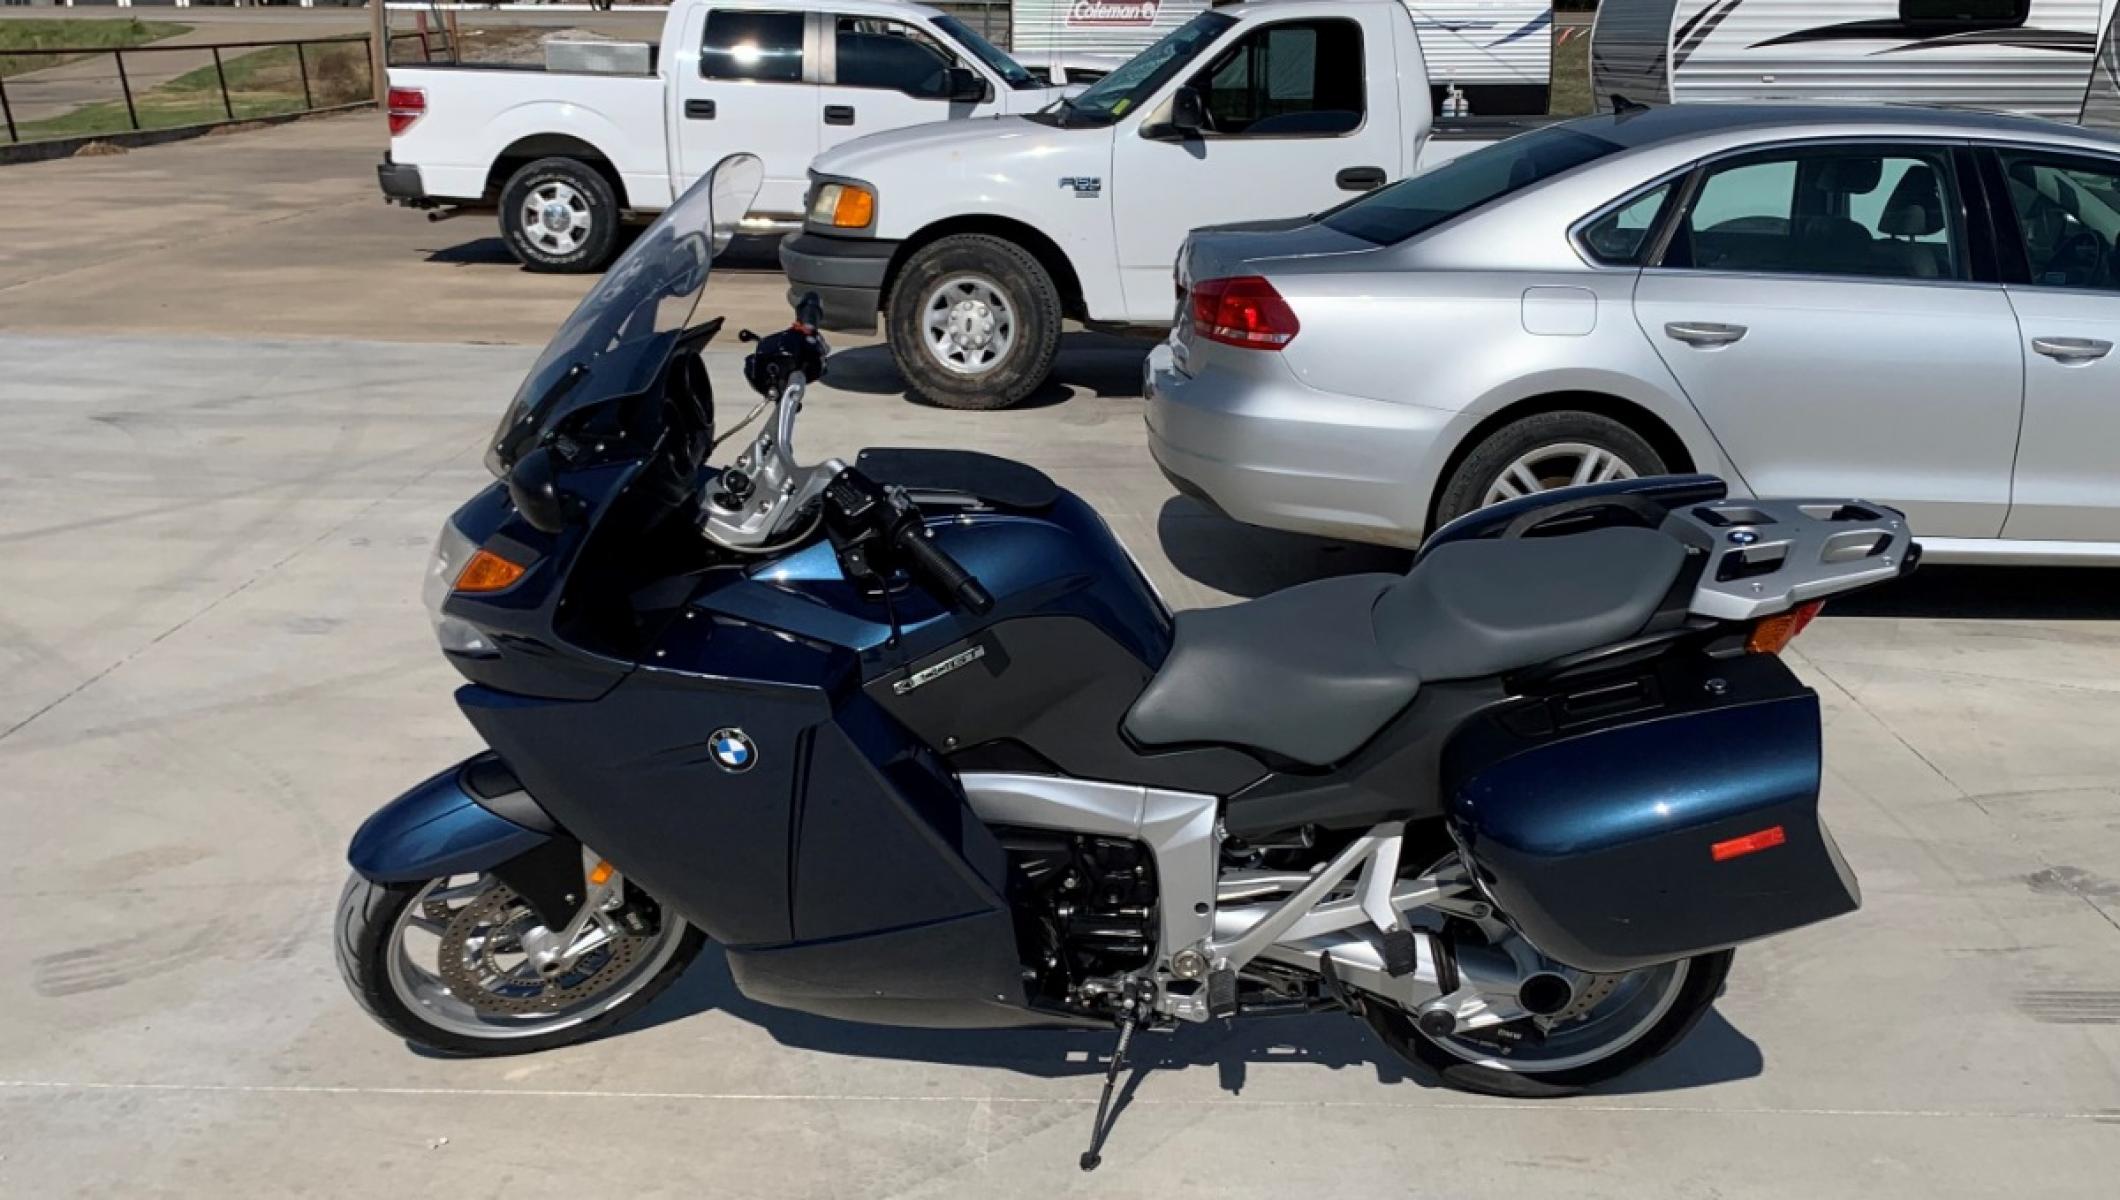 2007 BLUE BMW K1200GT K1200 (WB10597087Z) with an 1157CC engine, located at 17760 HWY 62, MORRIS, 74445, 35.609104, -95.877060 - THE 2007 BMW K1200GT IS A SPORT-TOURING MOTORCYCLE MADE BY BMW. THE SECOND GENERATION K1200GT, INTRODUCED IN 2006, USES ESSENTULY THE SAME INLINE-4 ENGINE AS THE BMW K1200S SPORTSBIKE, WHICH HELD THE WORLD SPEED RECORD IN 2005 FOR ITS CLASS AT 279.33 km/h (173.57 mph), AND THE K1200R. THE NEW MODEL - Photo #7